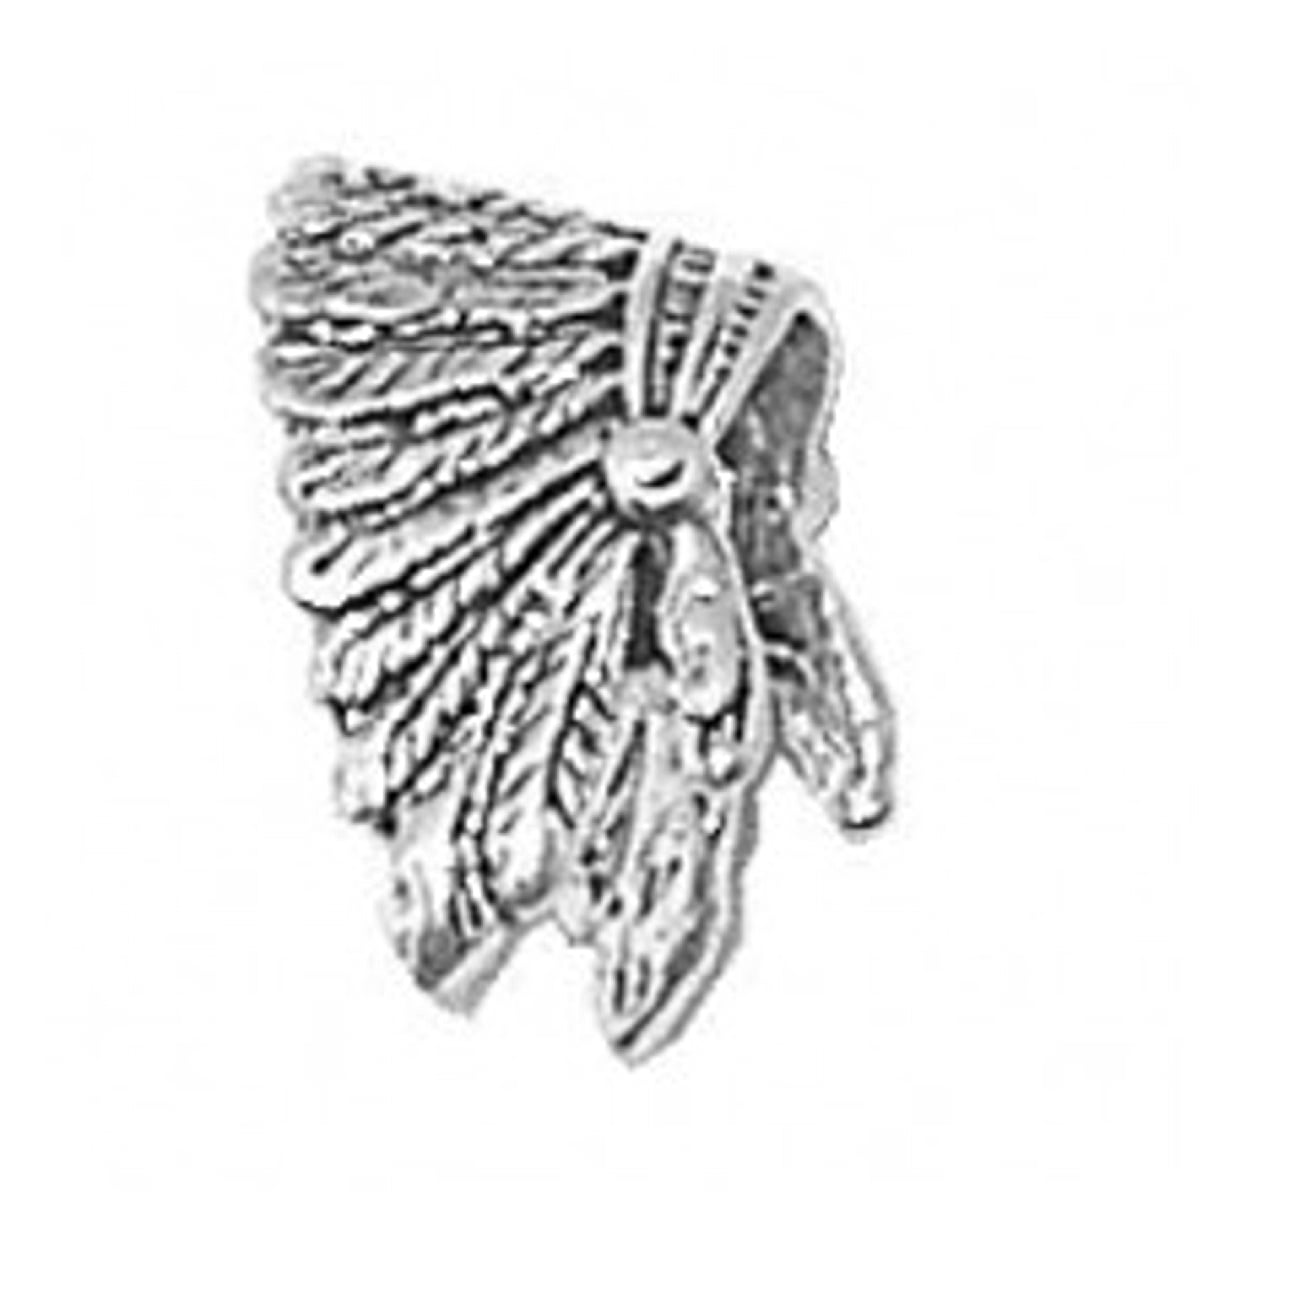 NATIVE AMERICAN CHIEF with HEADDRESS .925 Sterling Silver EUROPEAN Bead Charm